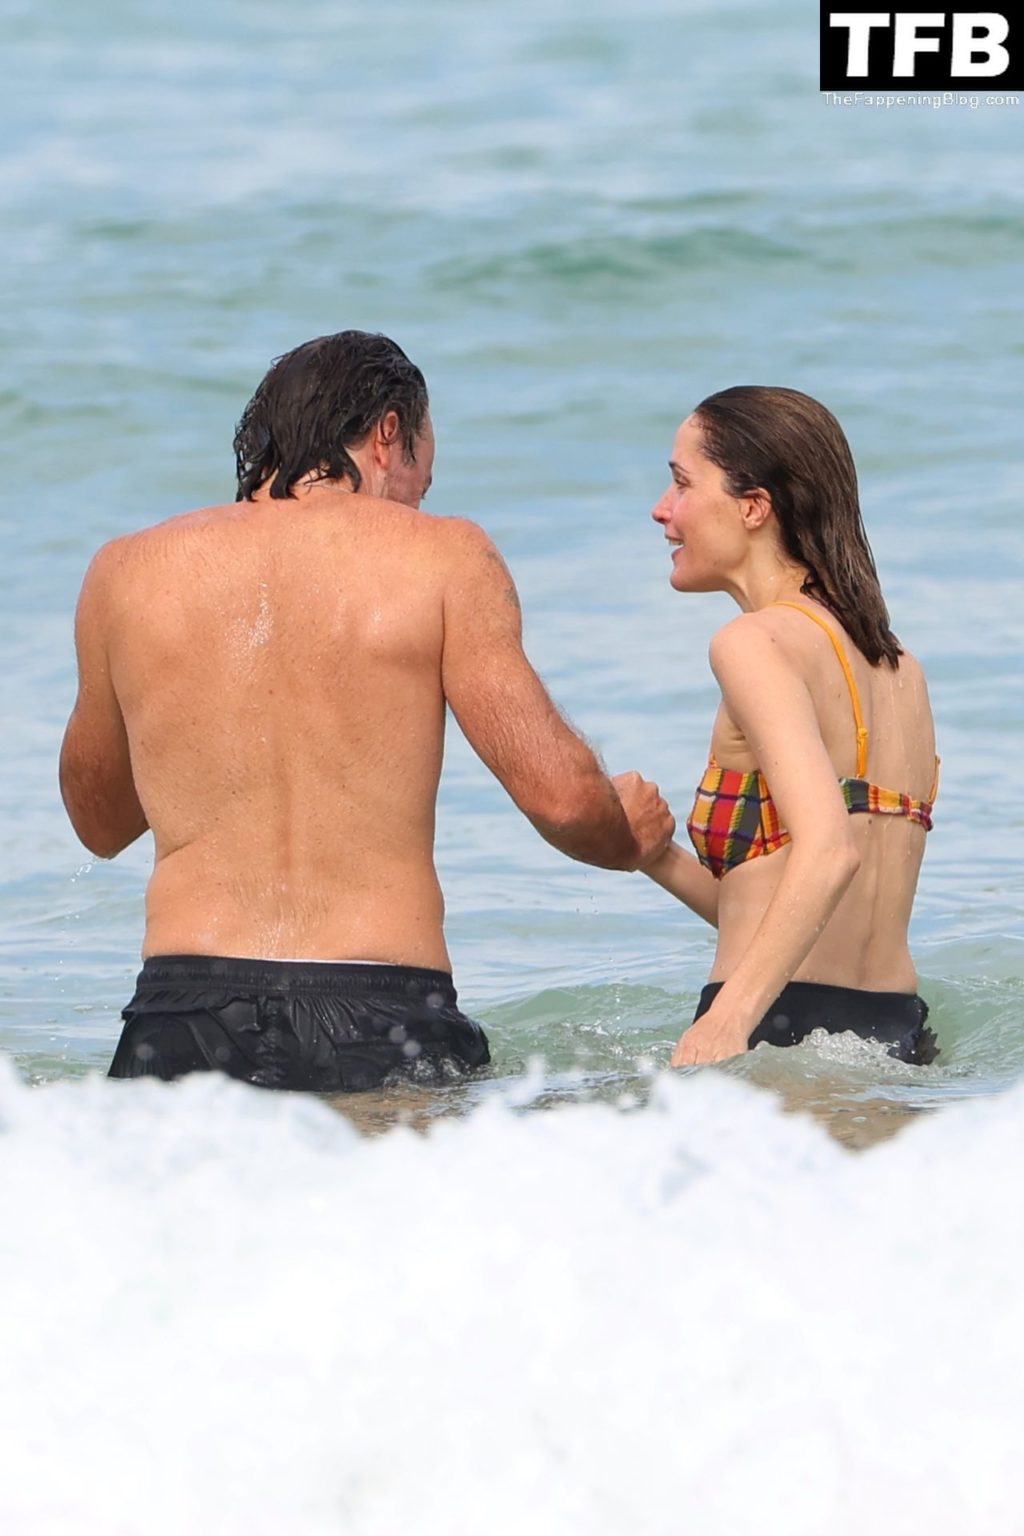 Rose Byrne Sexy The Fappening Blog 14 1024x1536 - Rose Byrne & Kick Gurry Enjoy a Day on the Beach in Sydney (90 Photos)